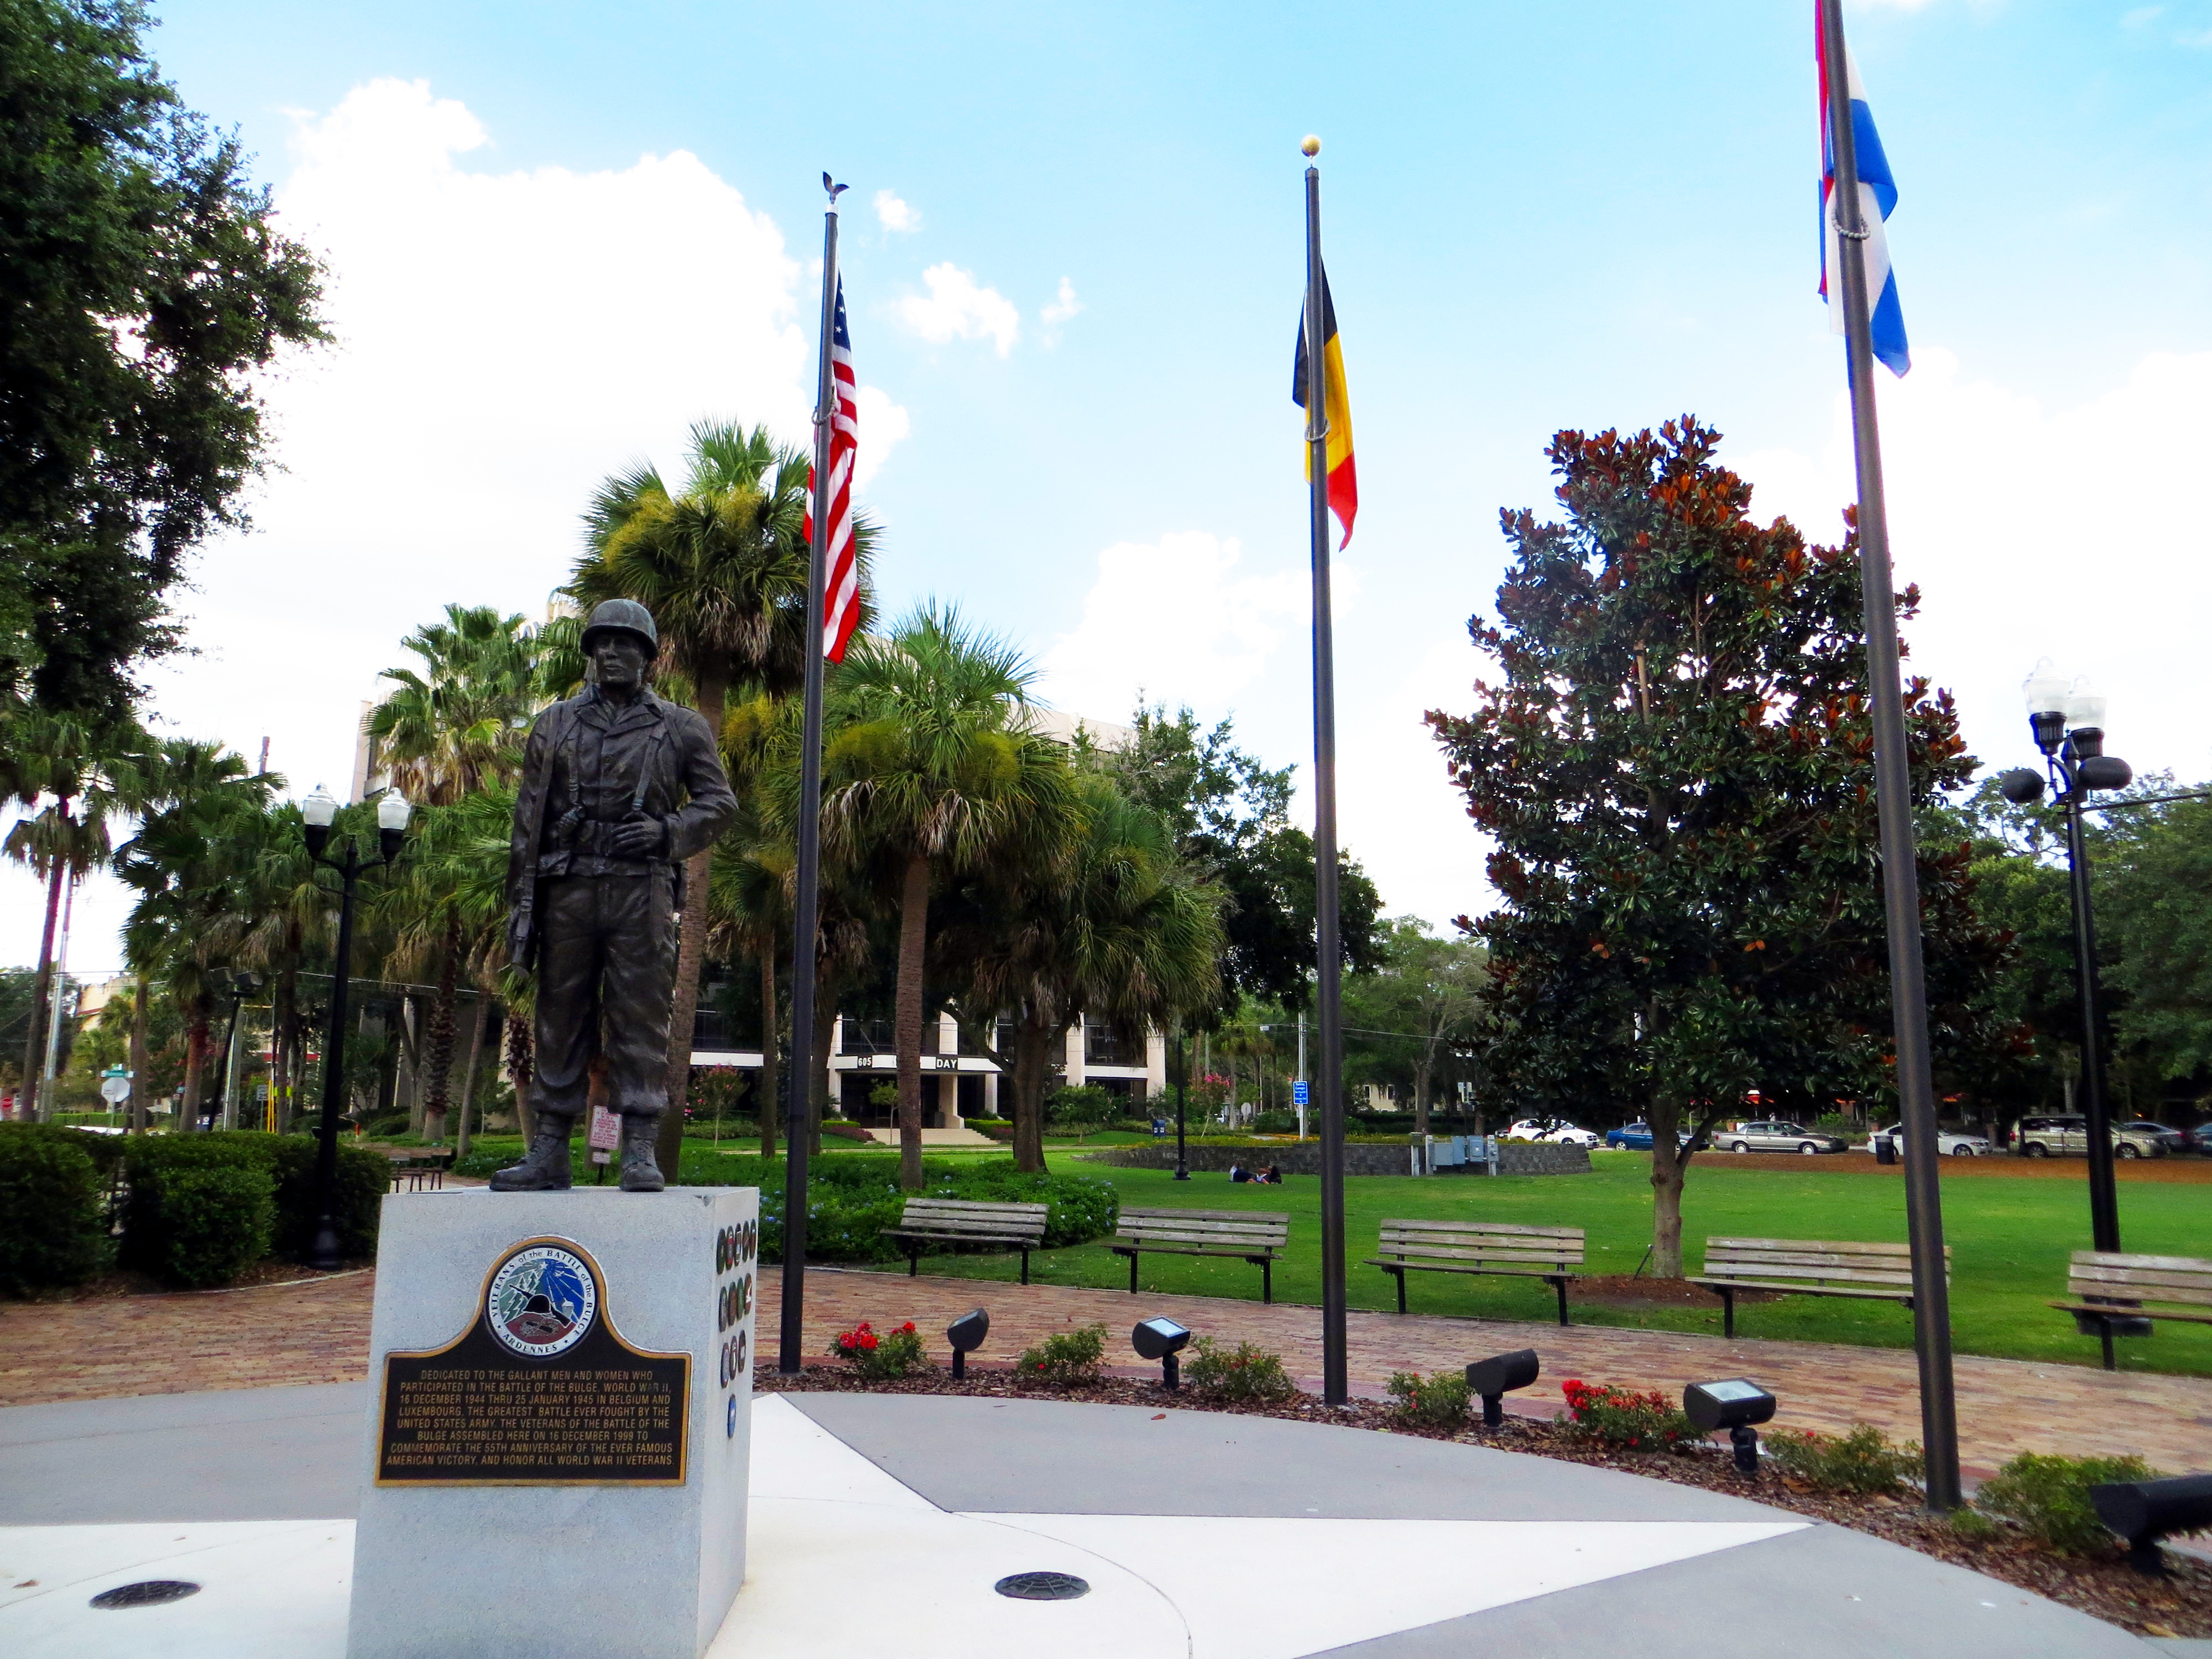 The bronze memorial was erected in 1999 by the Central Florida Chapter of the Veterans of the Battle of the Bulge. Image obtained from Panoramio.